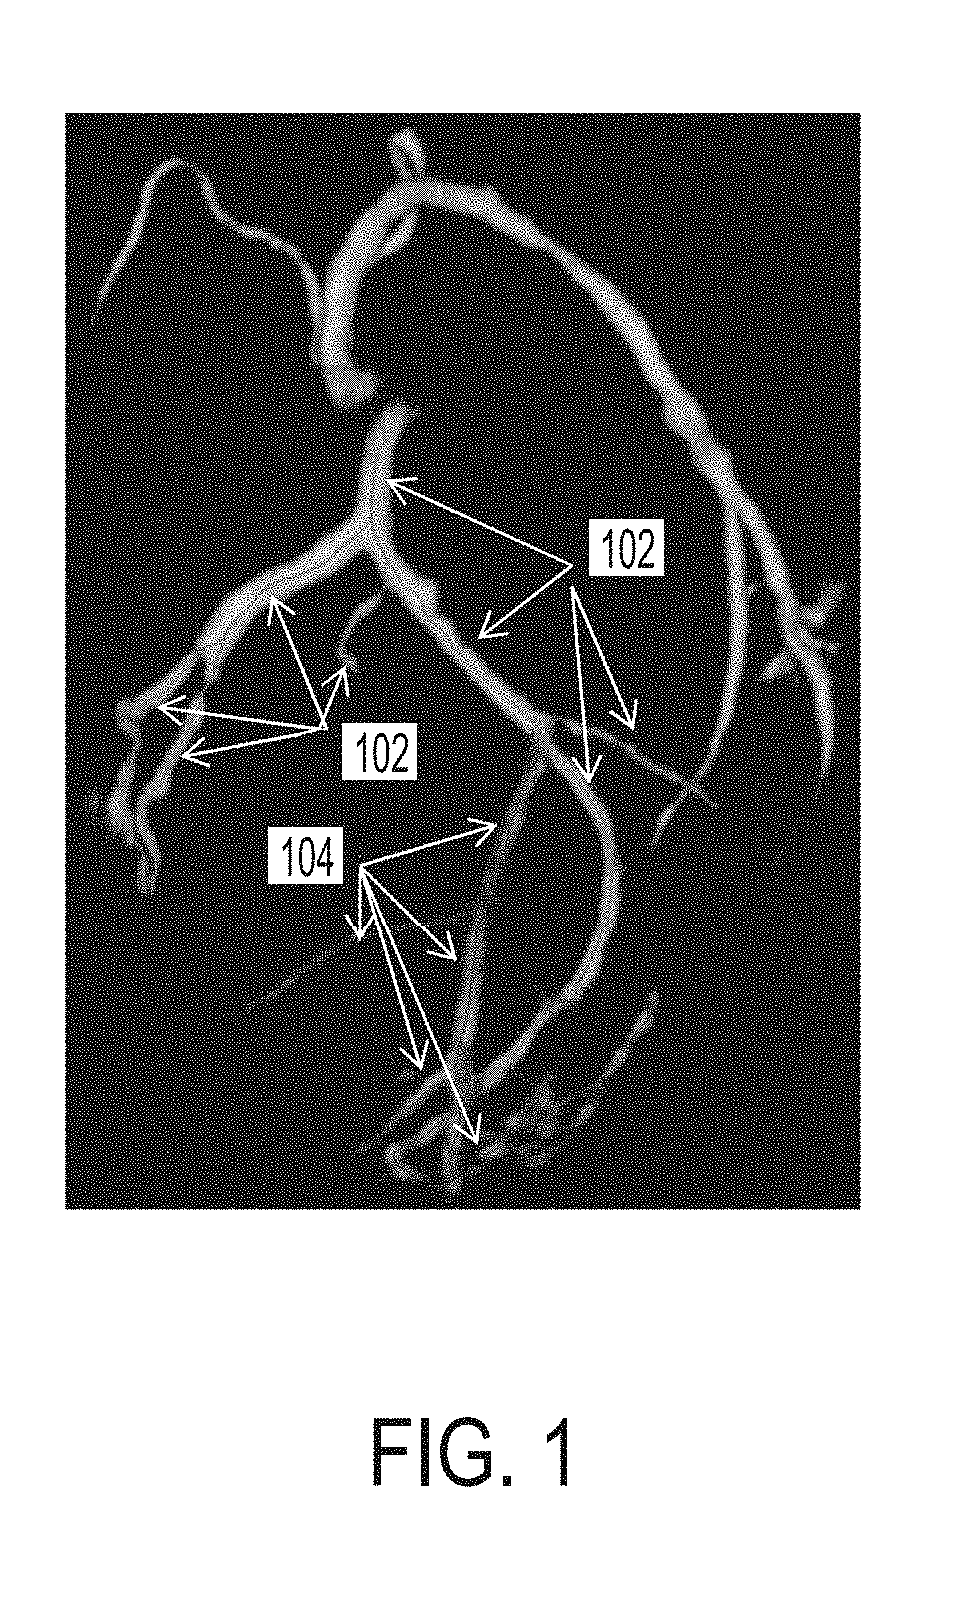 Method and System for Machine Learning Based Classification of Vascular Branches